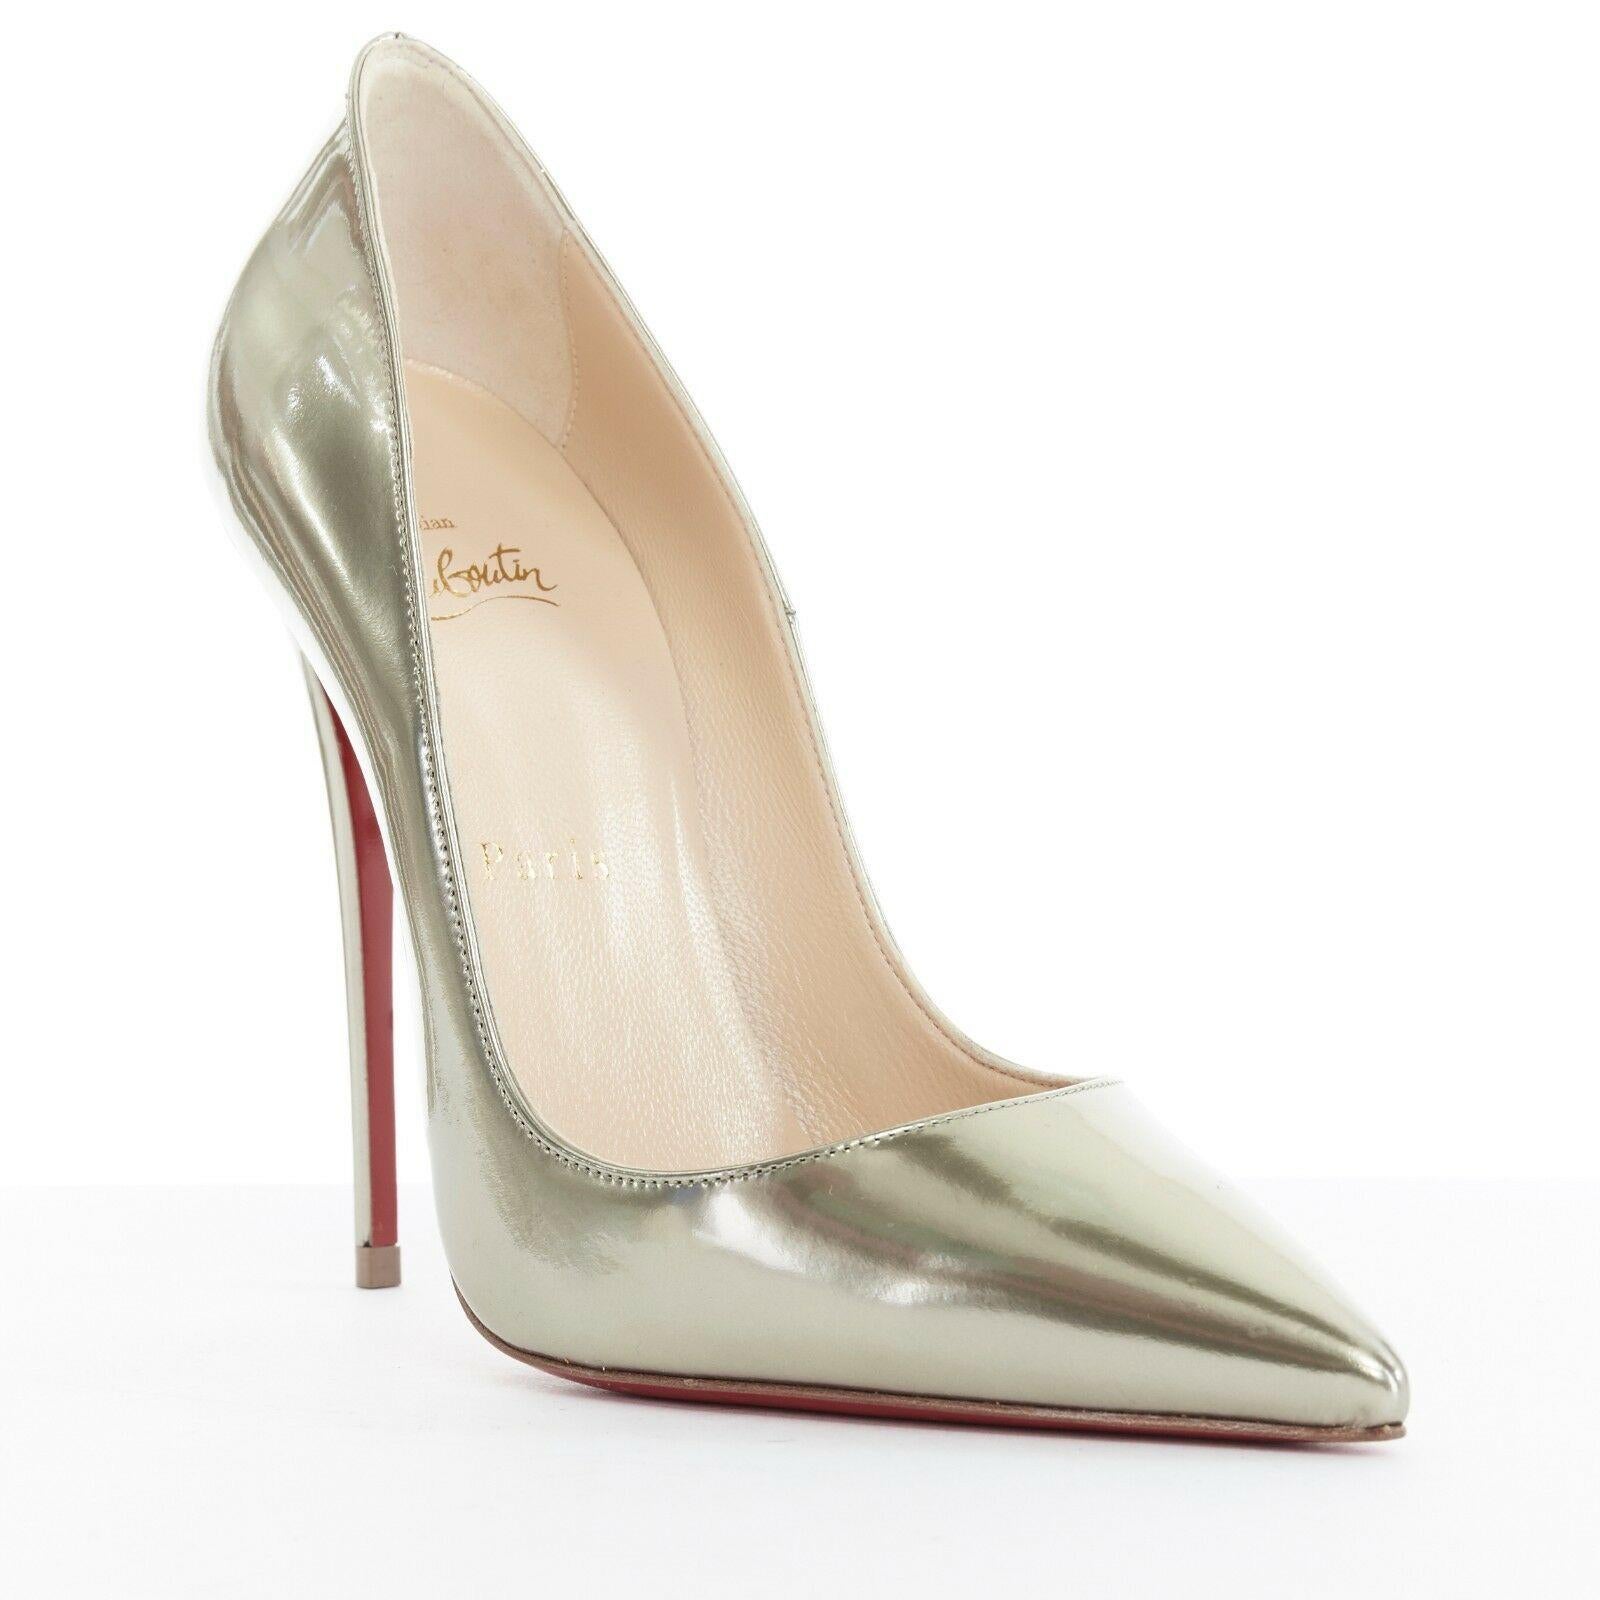 new CHRISTIAN LOUBOUTIN So Kate 120 dark silver mirrored leather pigalle EU38
CHRISTIAN LOUBOUTIN
So Kate 120. Antispecchio color. 
Dark gunmetal mirrored silver leather. 
Pointed toe.
Stiletto heel. 
Low-cut vamp. 
Nude leather piping. 
Slip on.